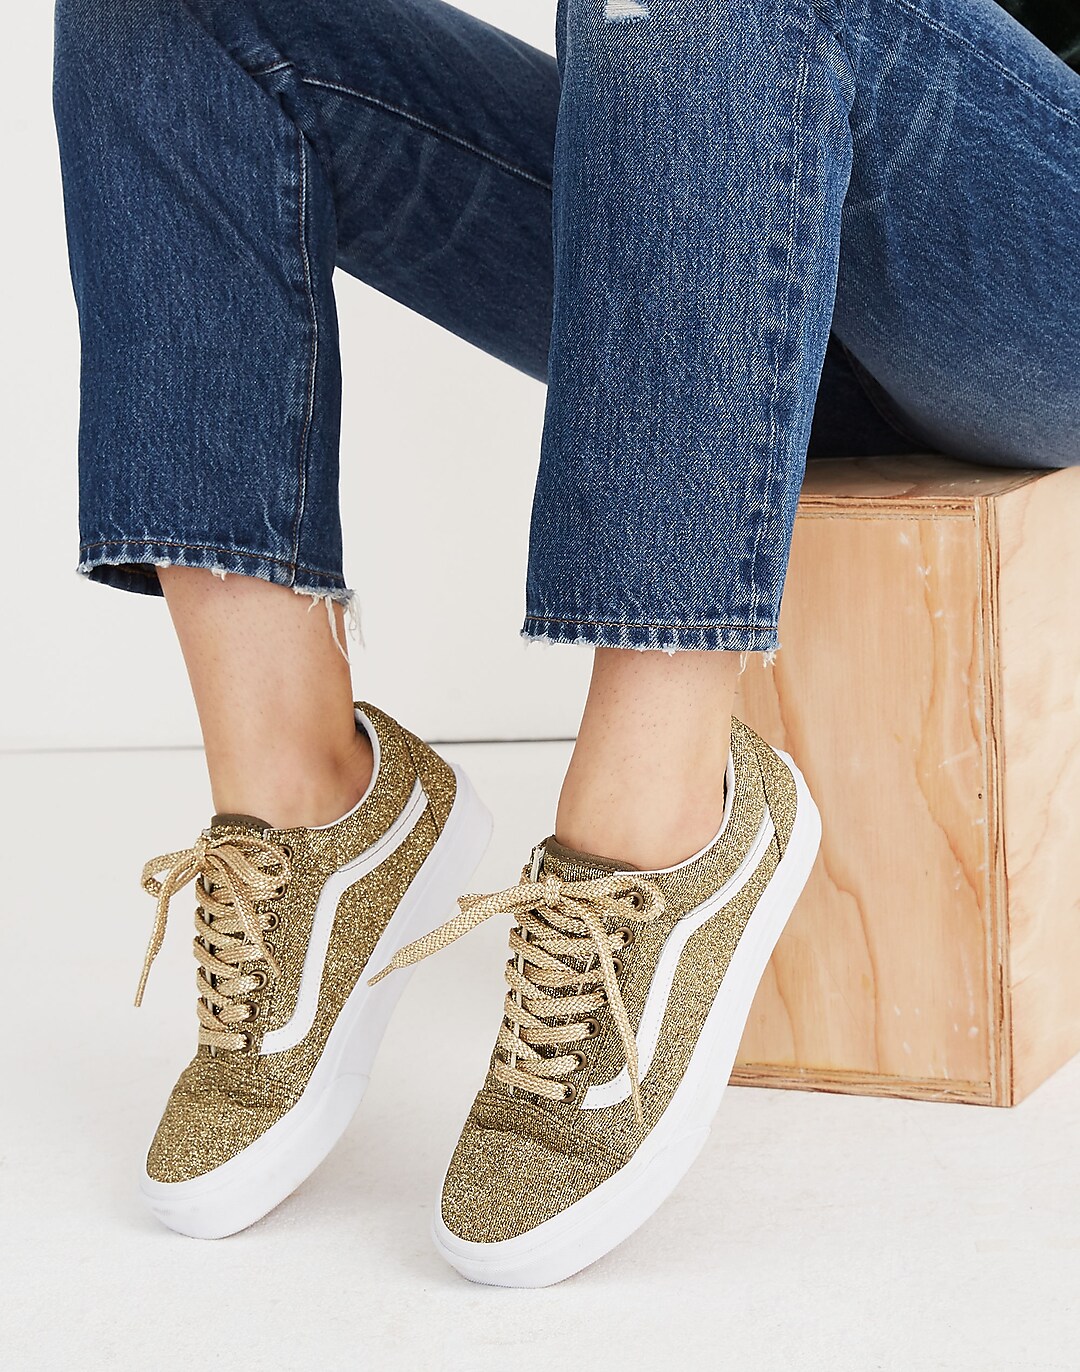 Vans® Unisex Old Skool in Lace-Up Glitter Sneakers Gold